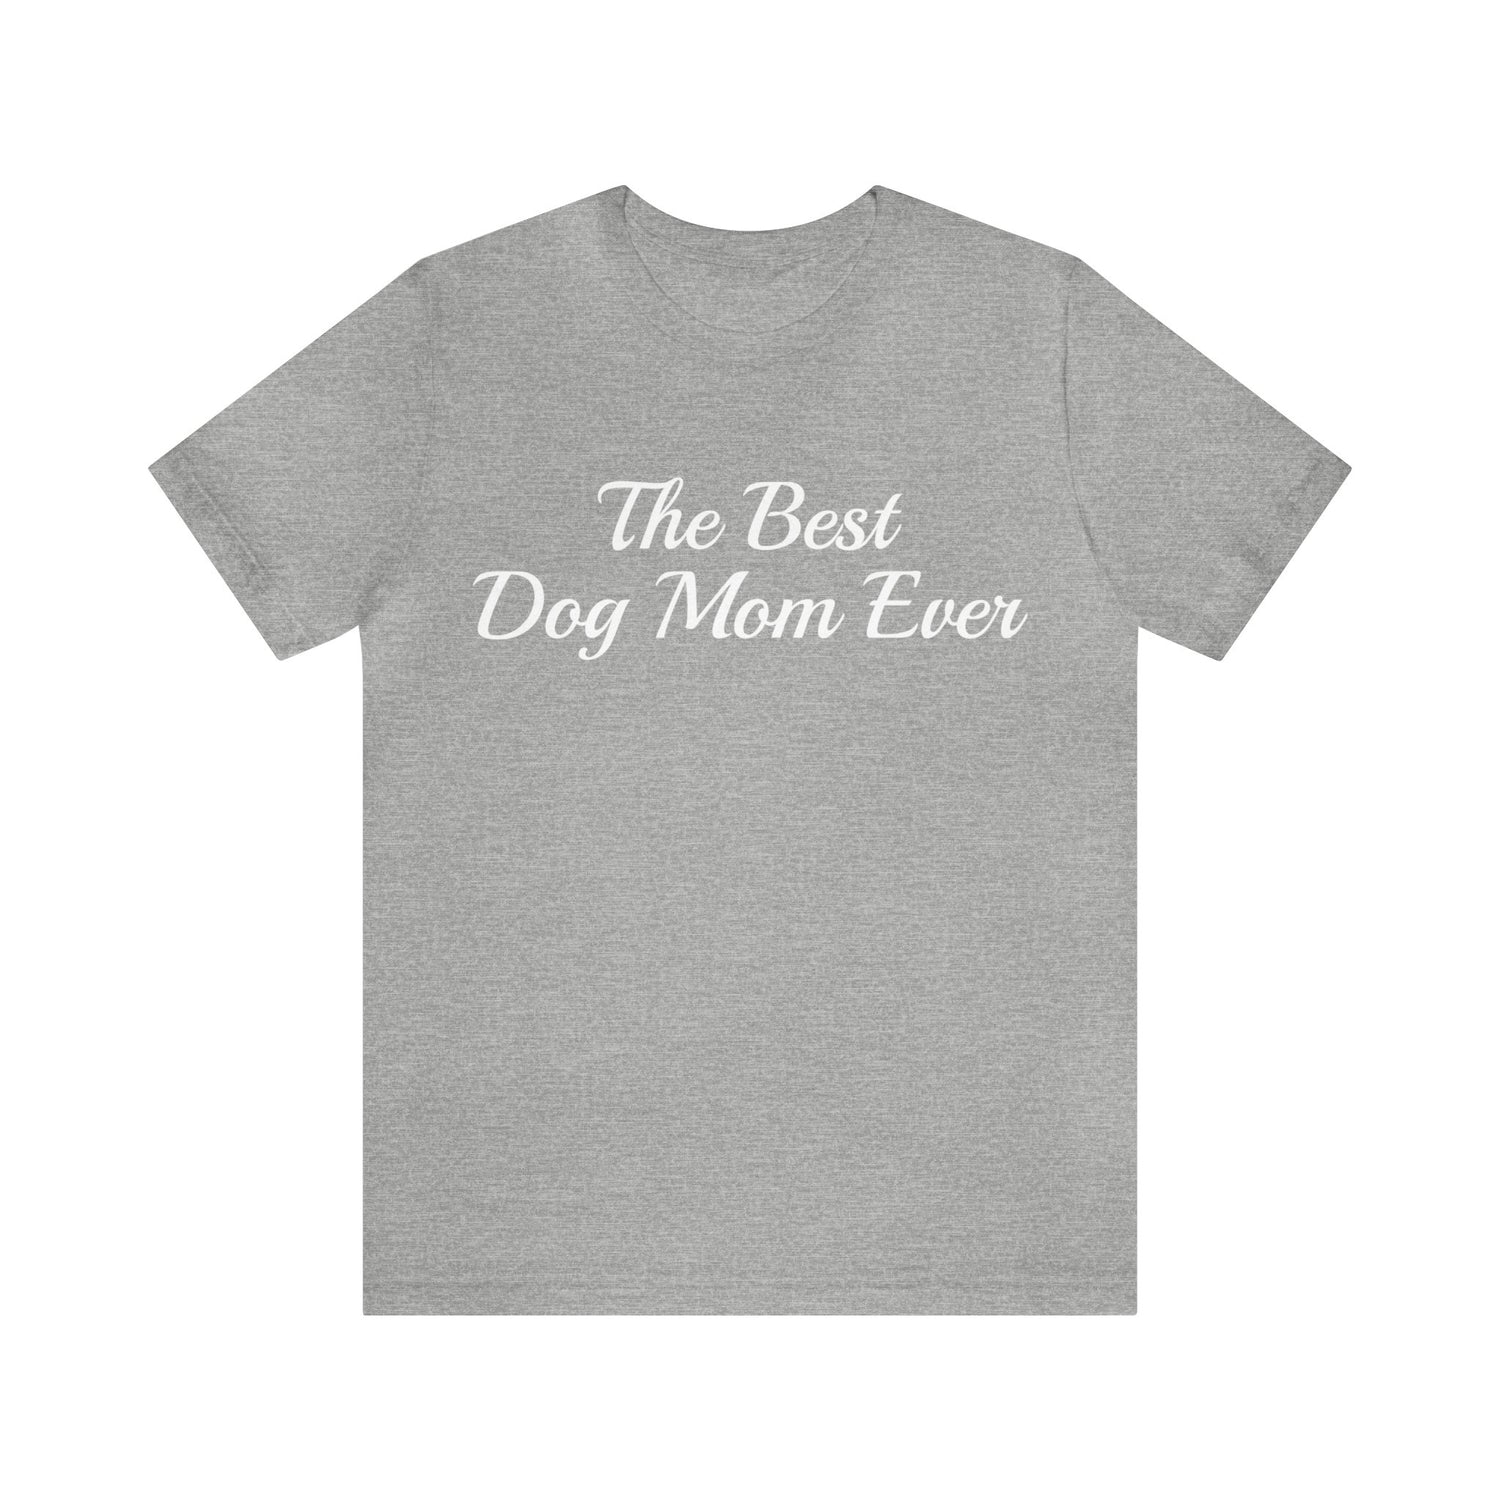 Athletic Heather T-Shirt Tshirt Design Gift for Friend and Family Short Sleeved Shirt for Dog Lovers Petrova Designs